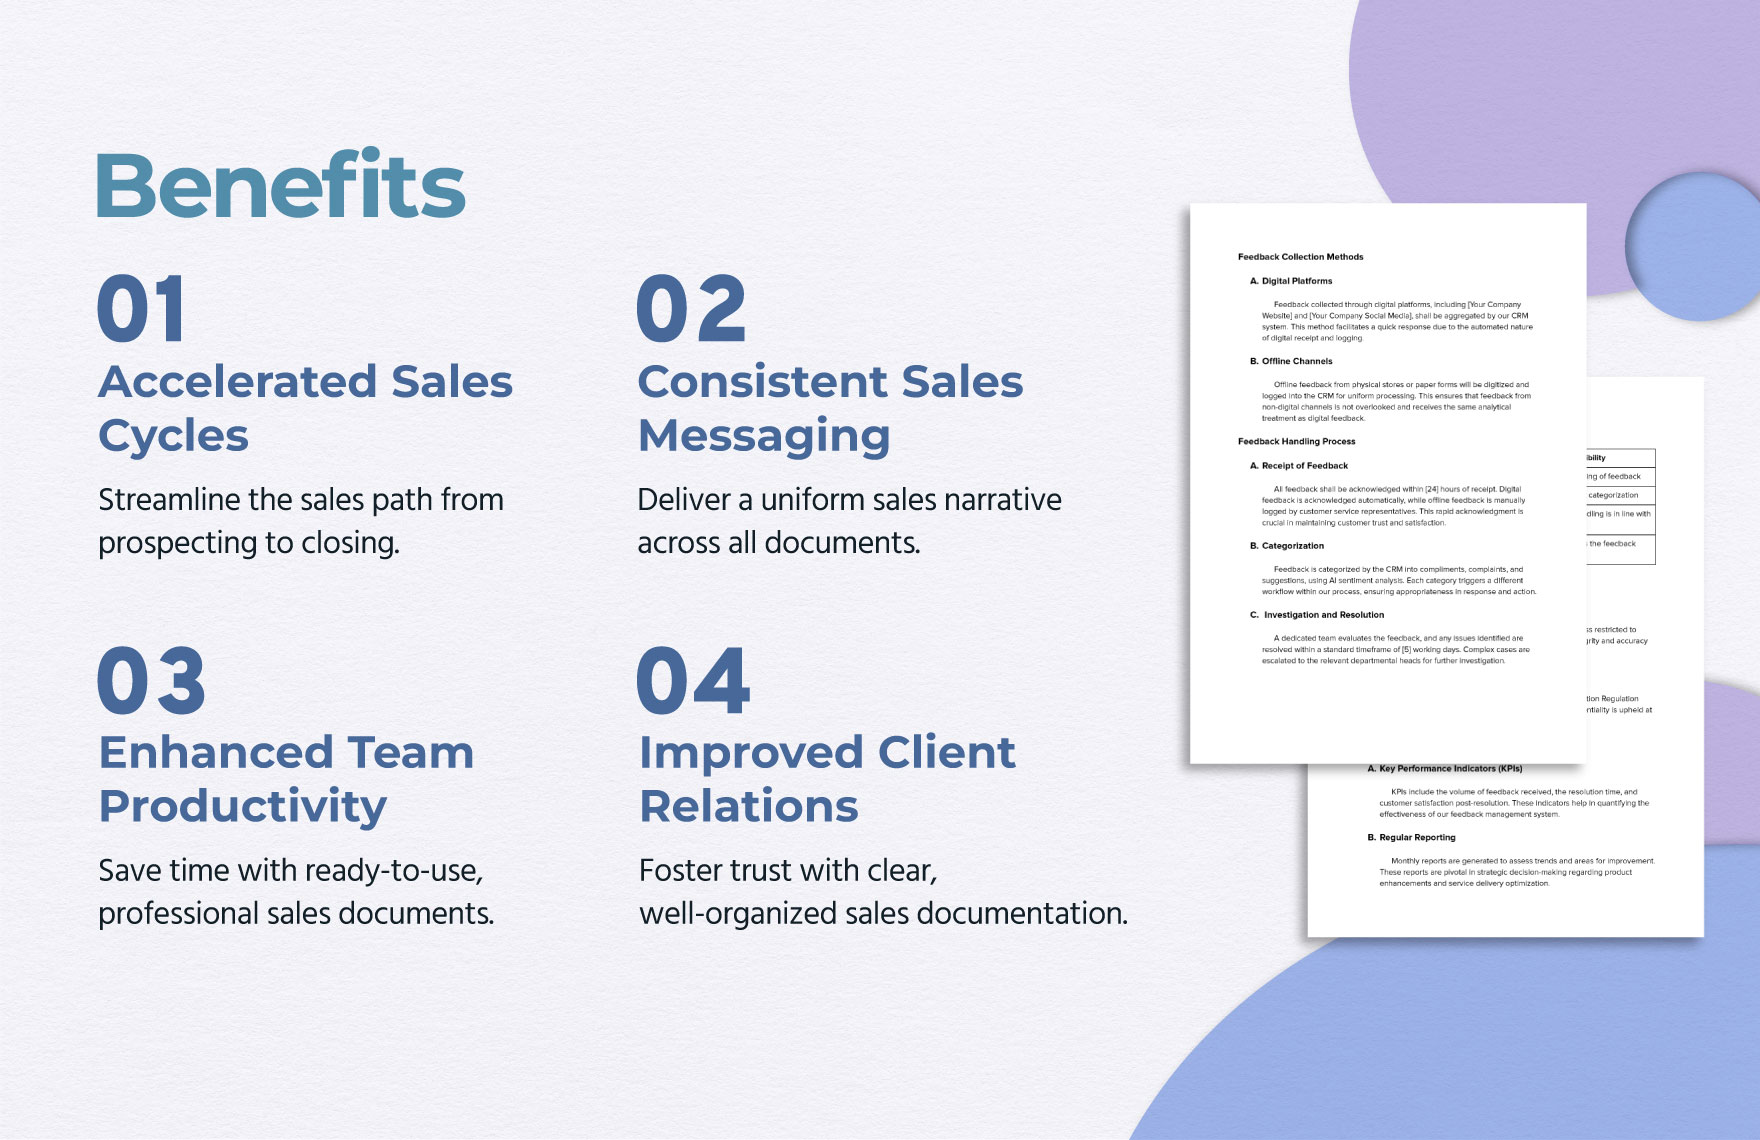 Sales Compliance Document for Feedback Handling Template